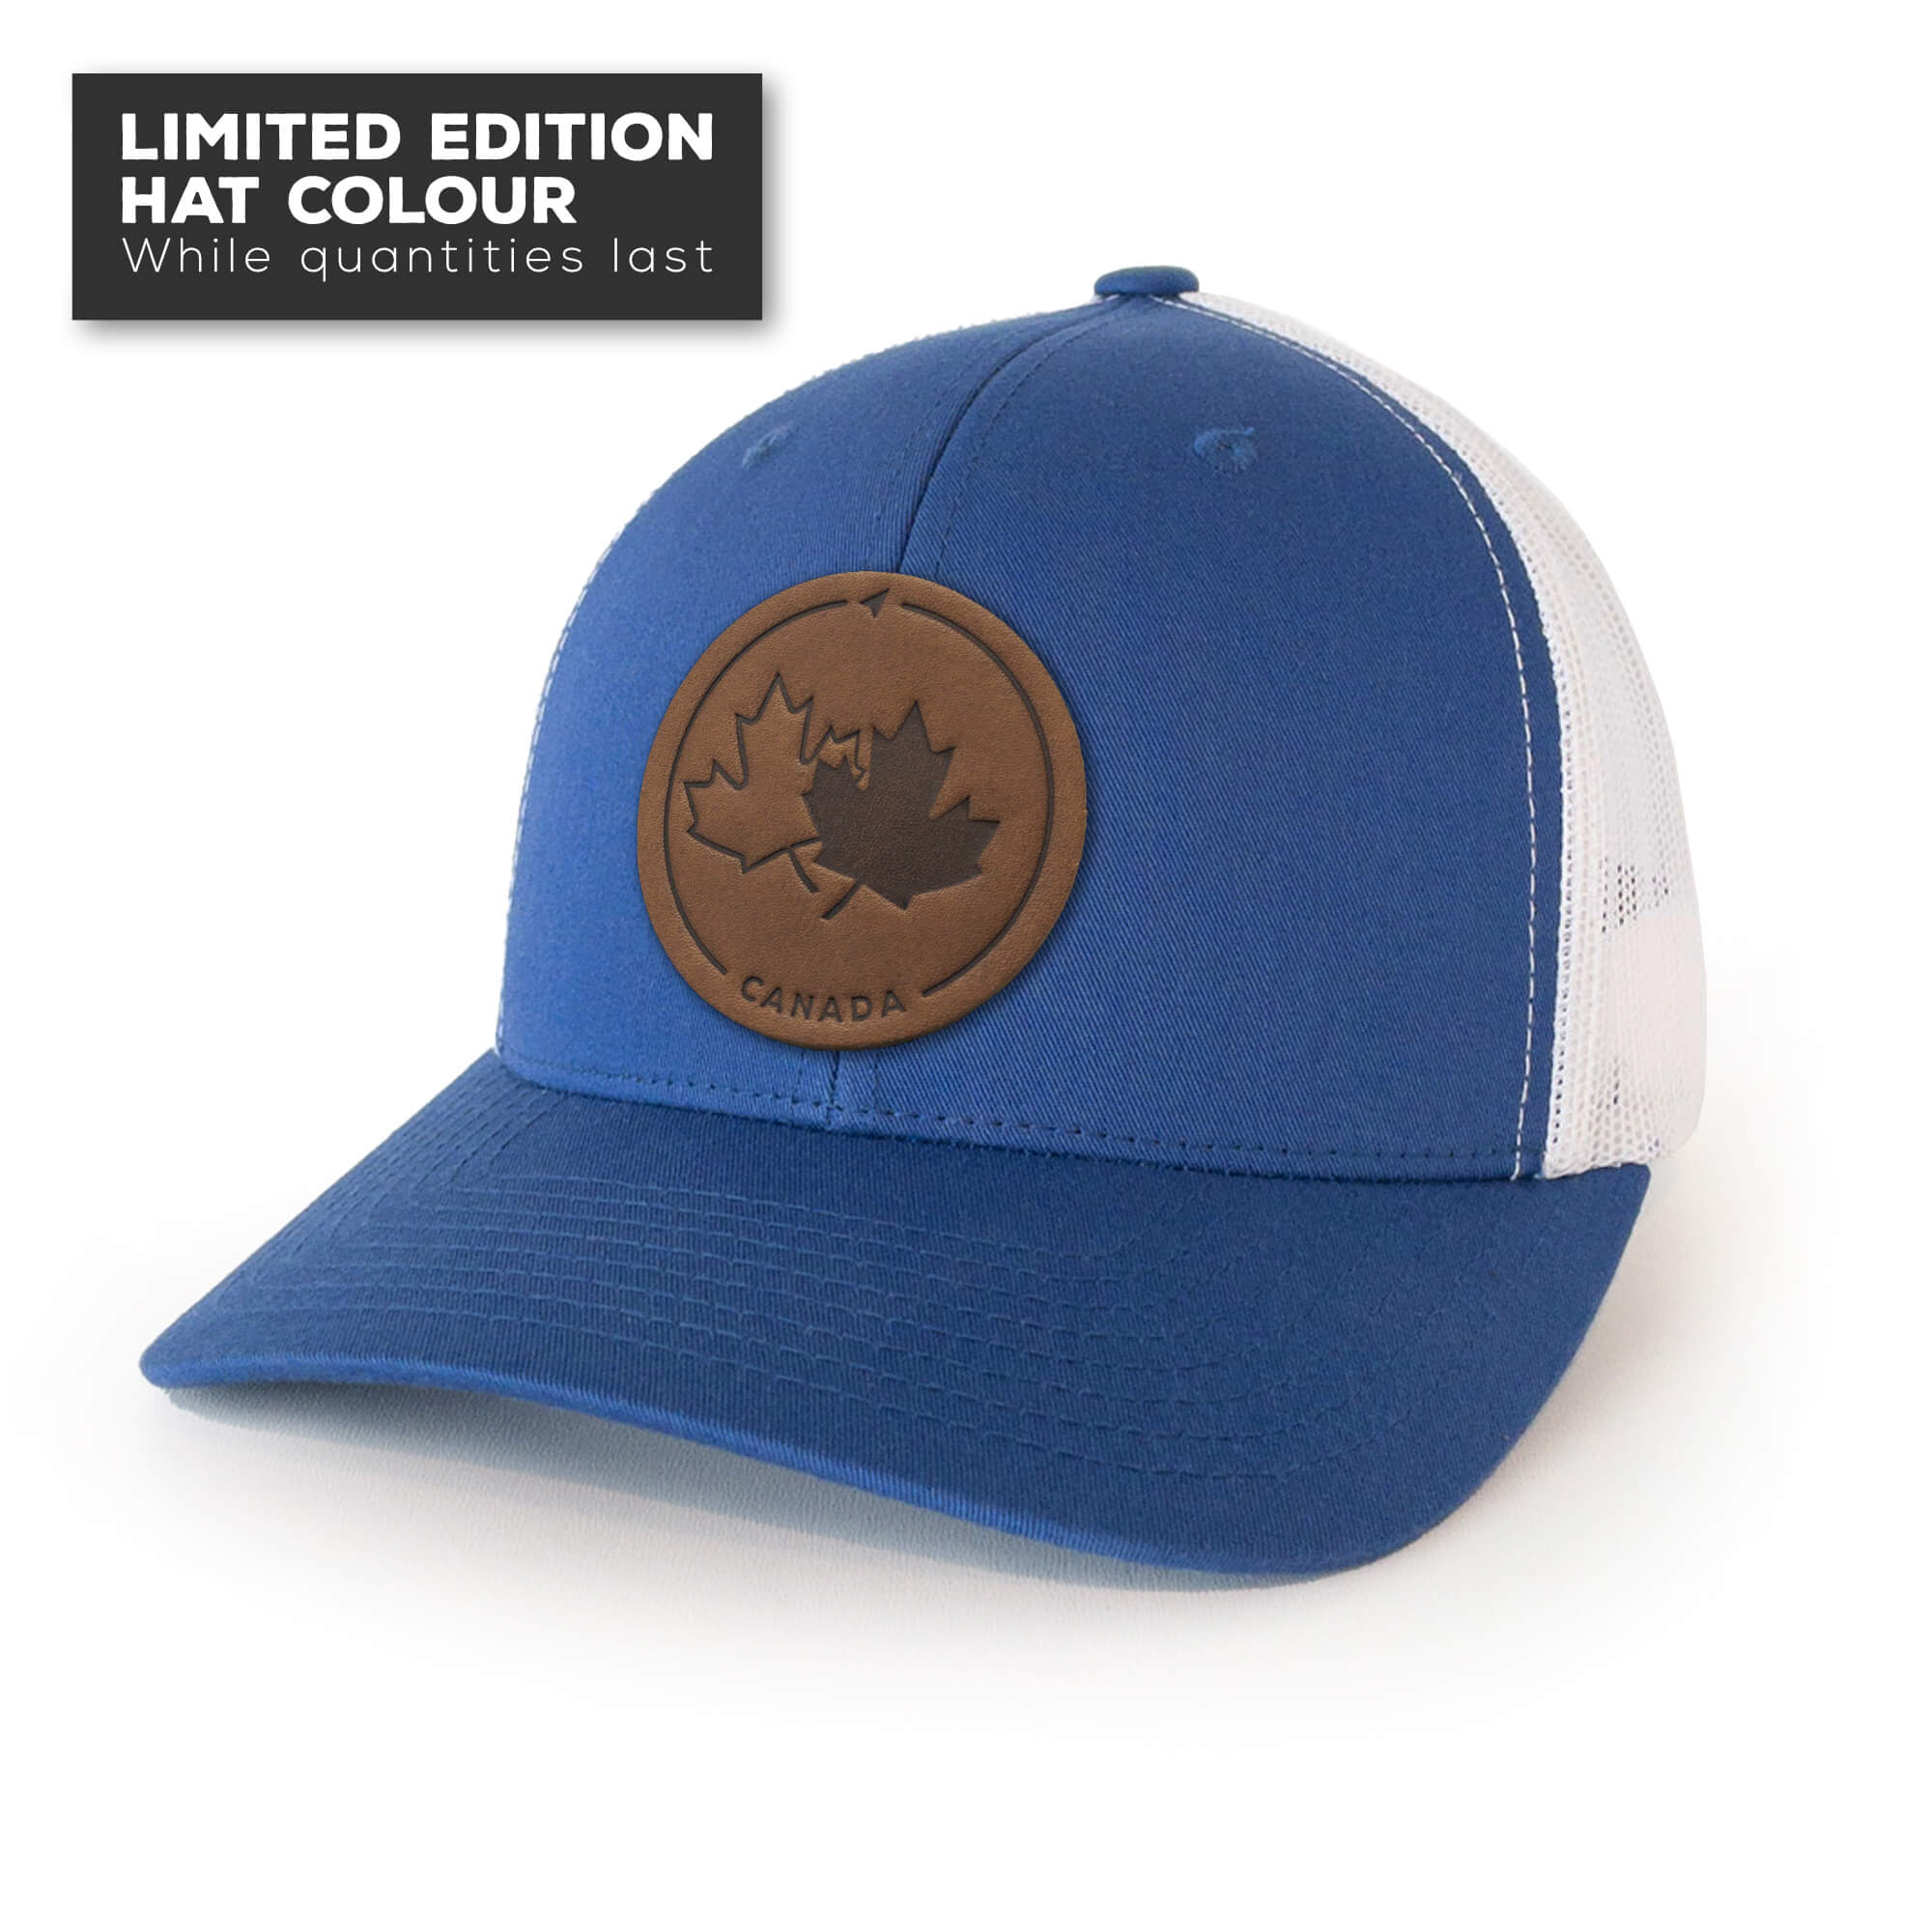 Royal Blue trucker hat with full-grain leather patch of Canada Strong and Free